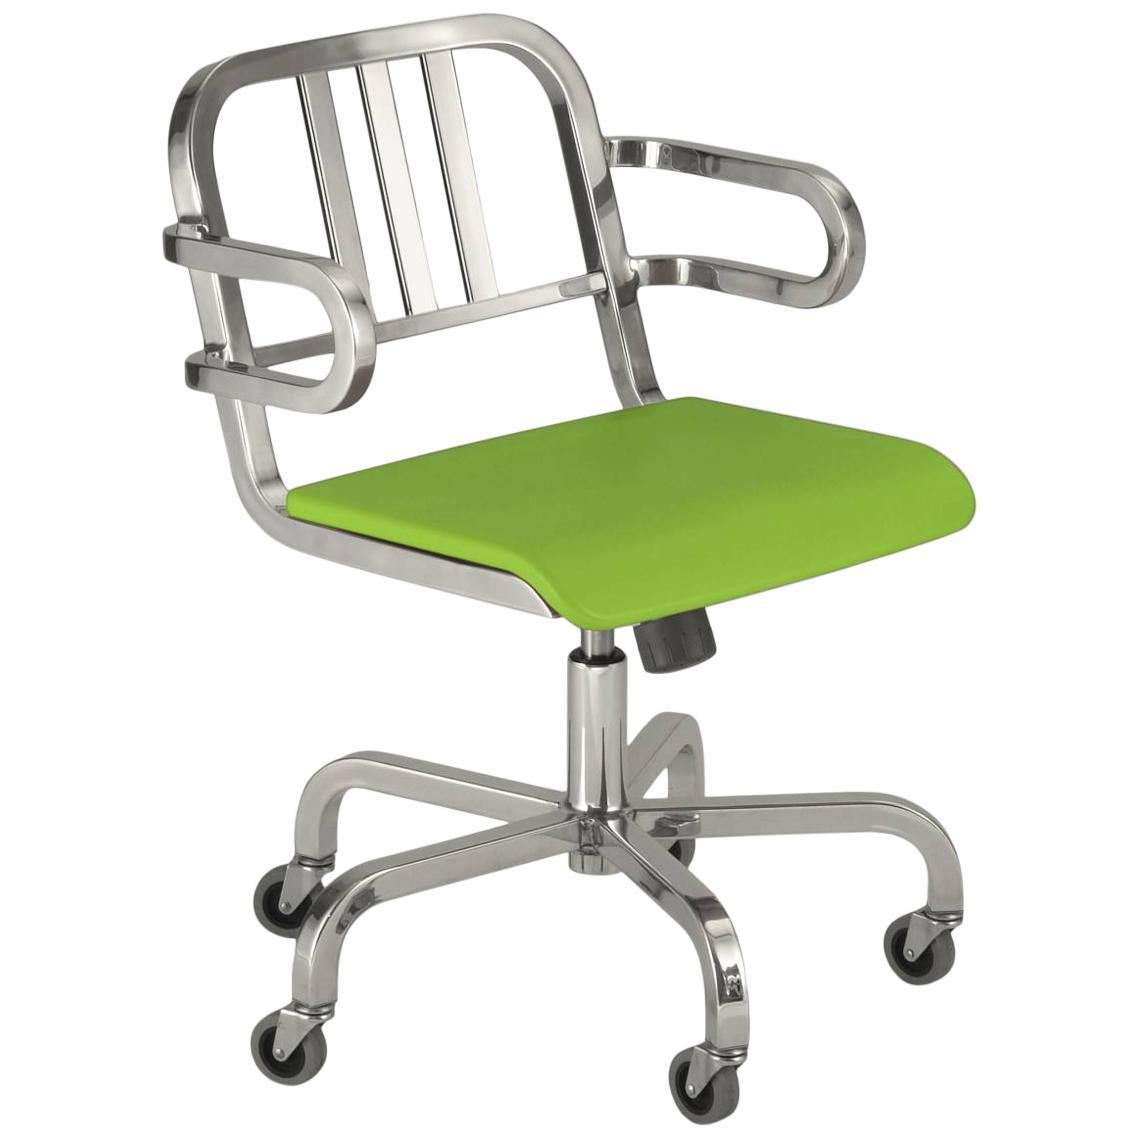 Emeco Nine-0 Swivel Armchair in Brushed Aluminum and Green by Ettore Sottsass